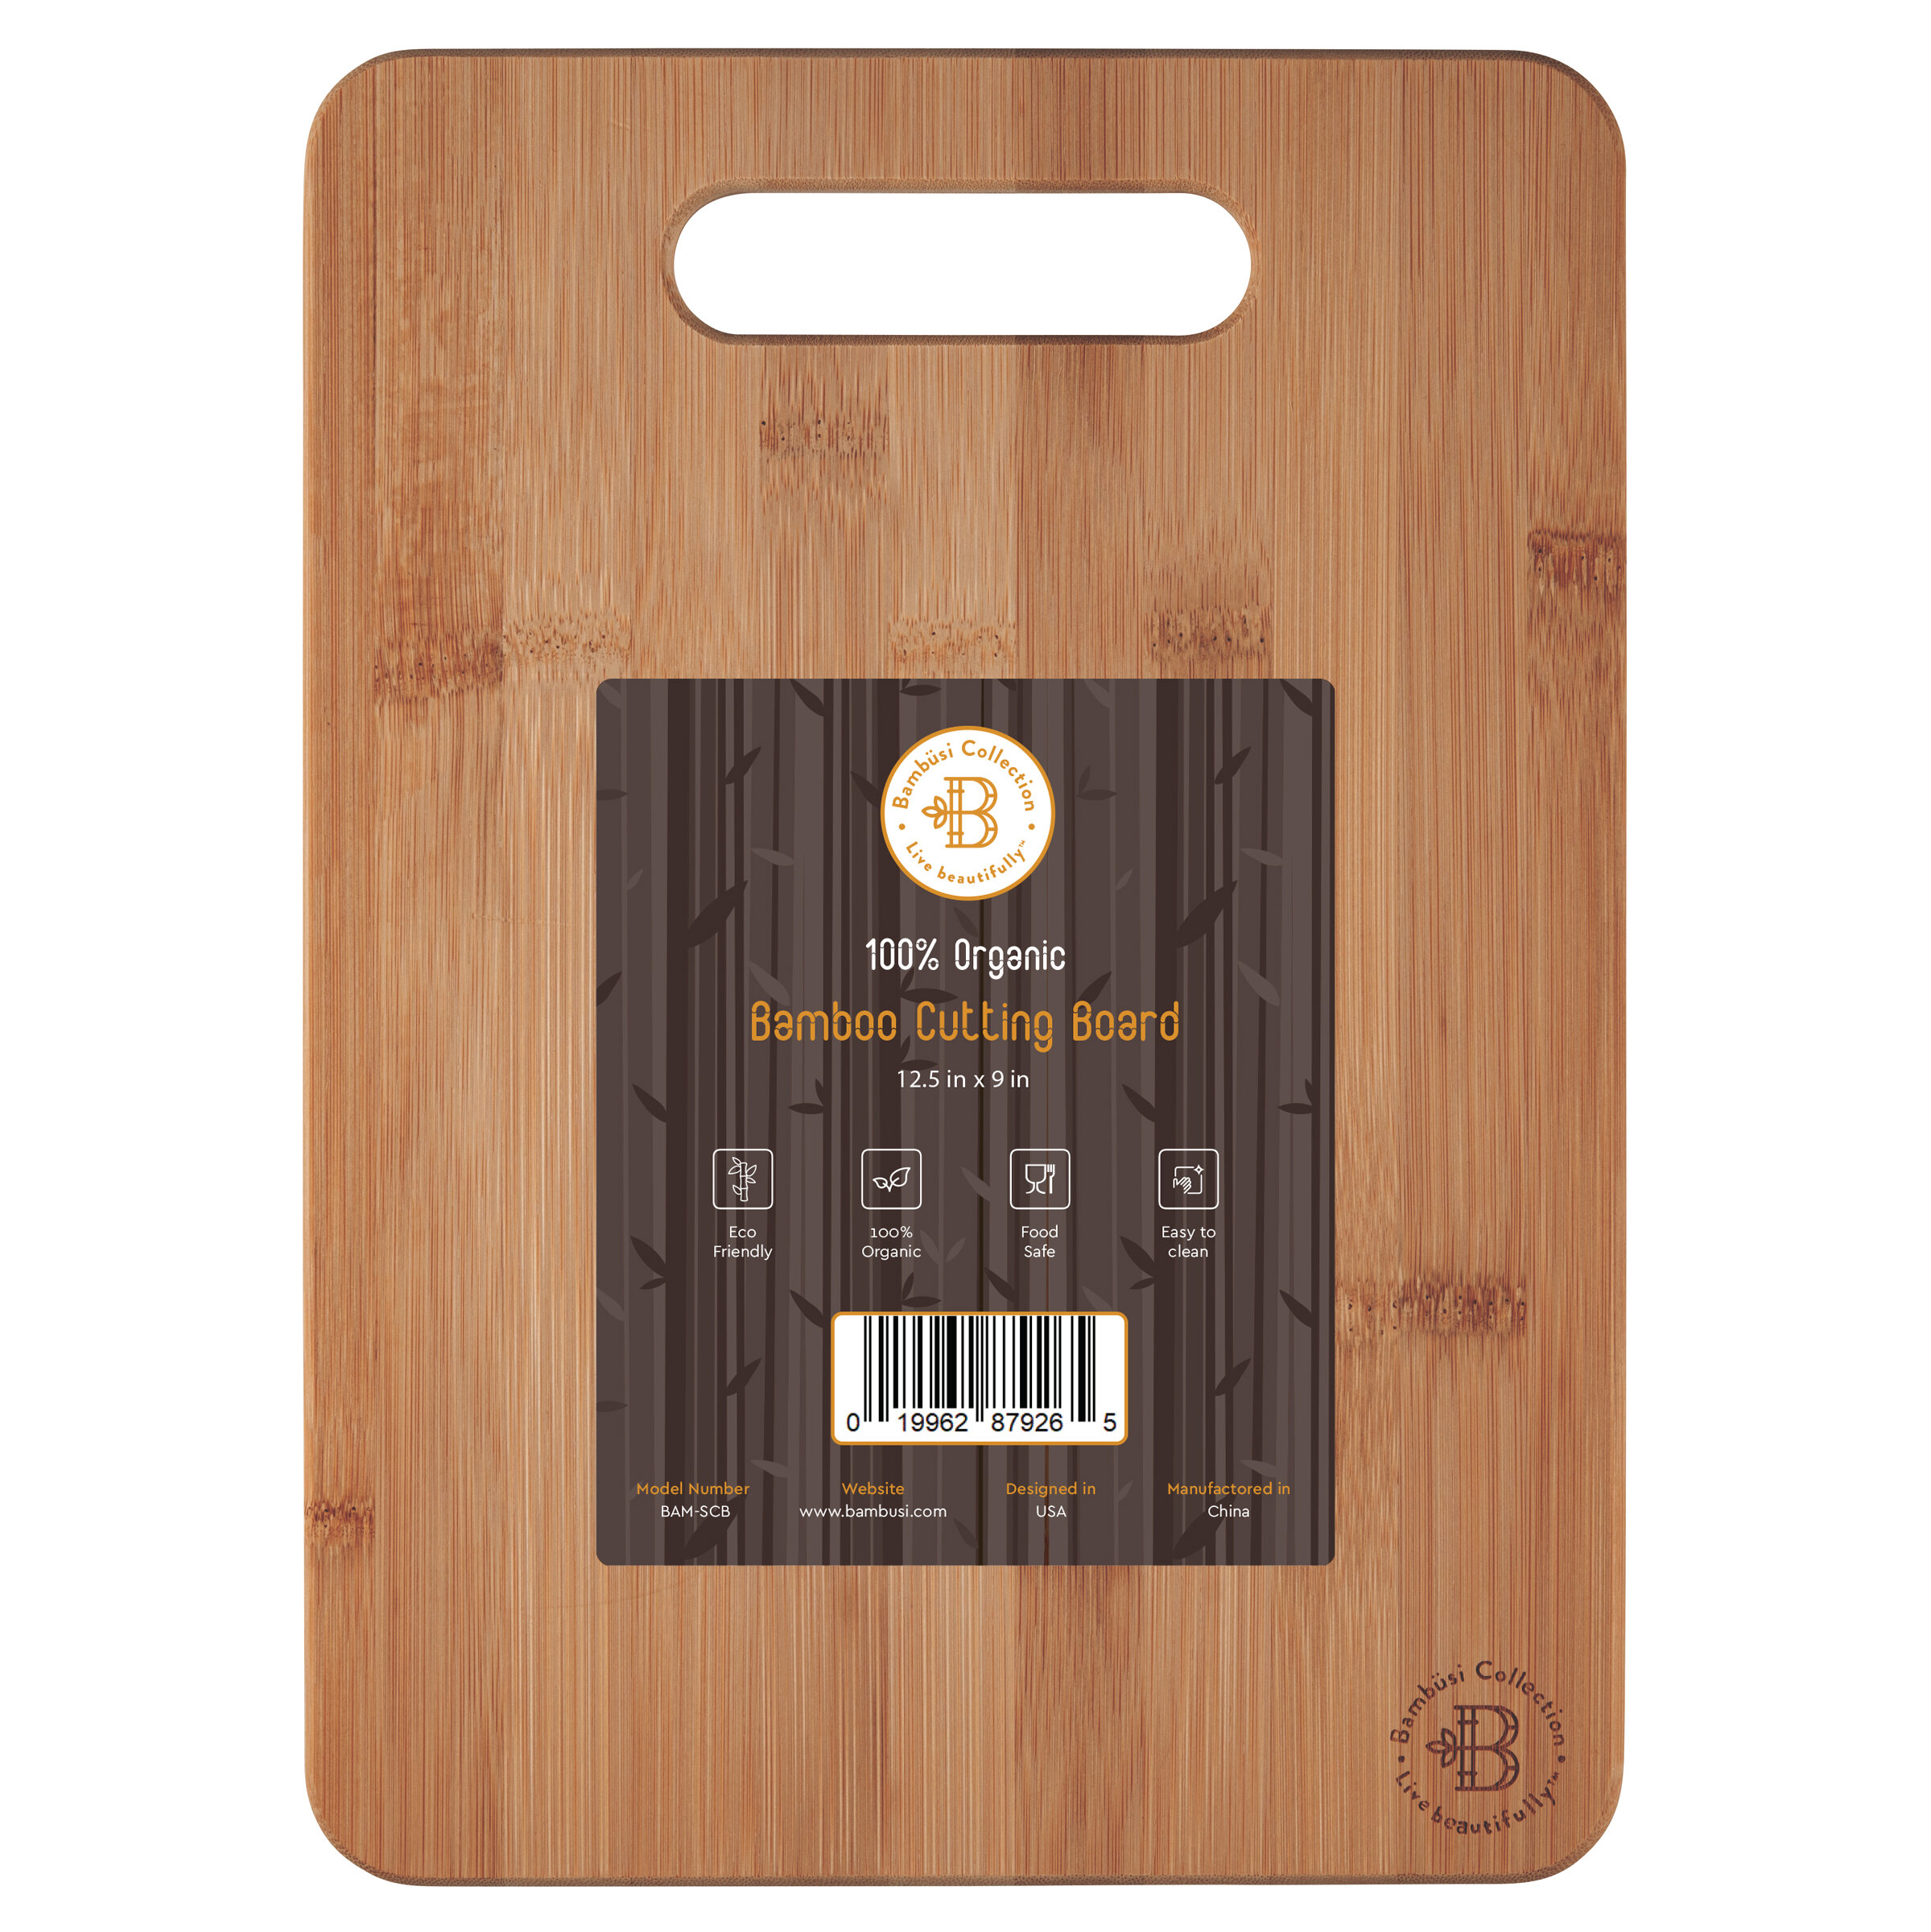 Belmint Chopping and Serving Bamboo Cutting Board & Reviews